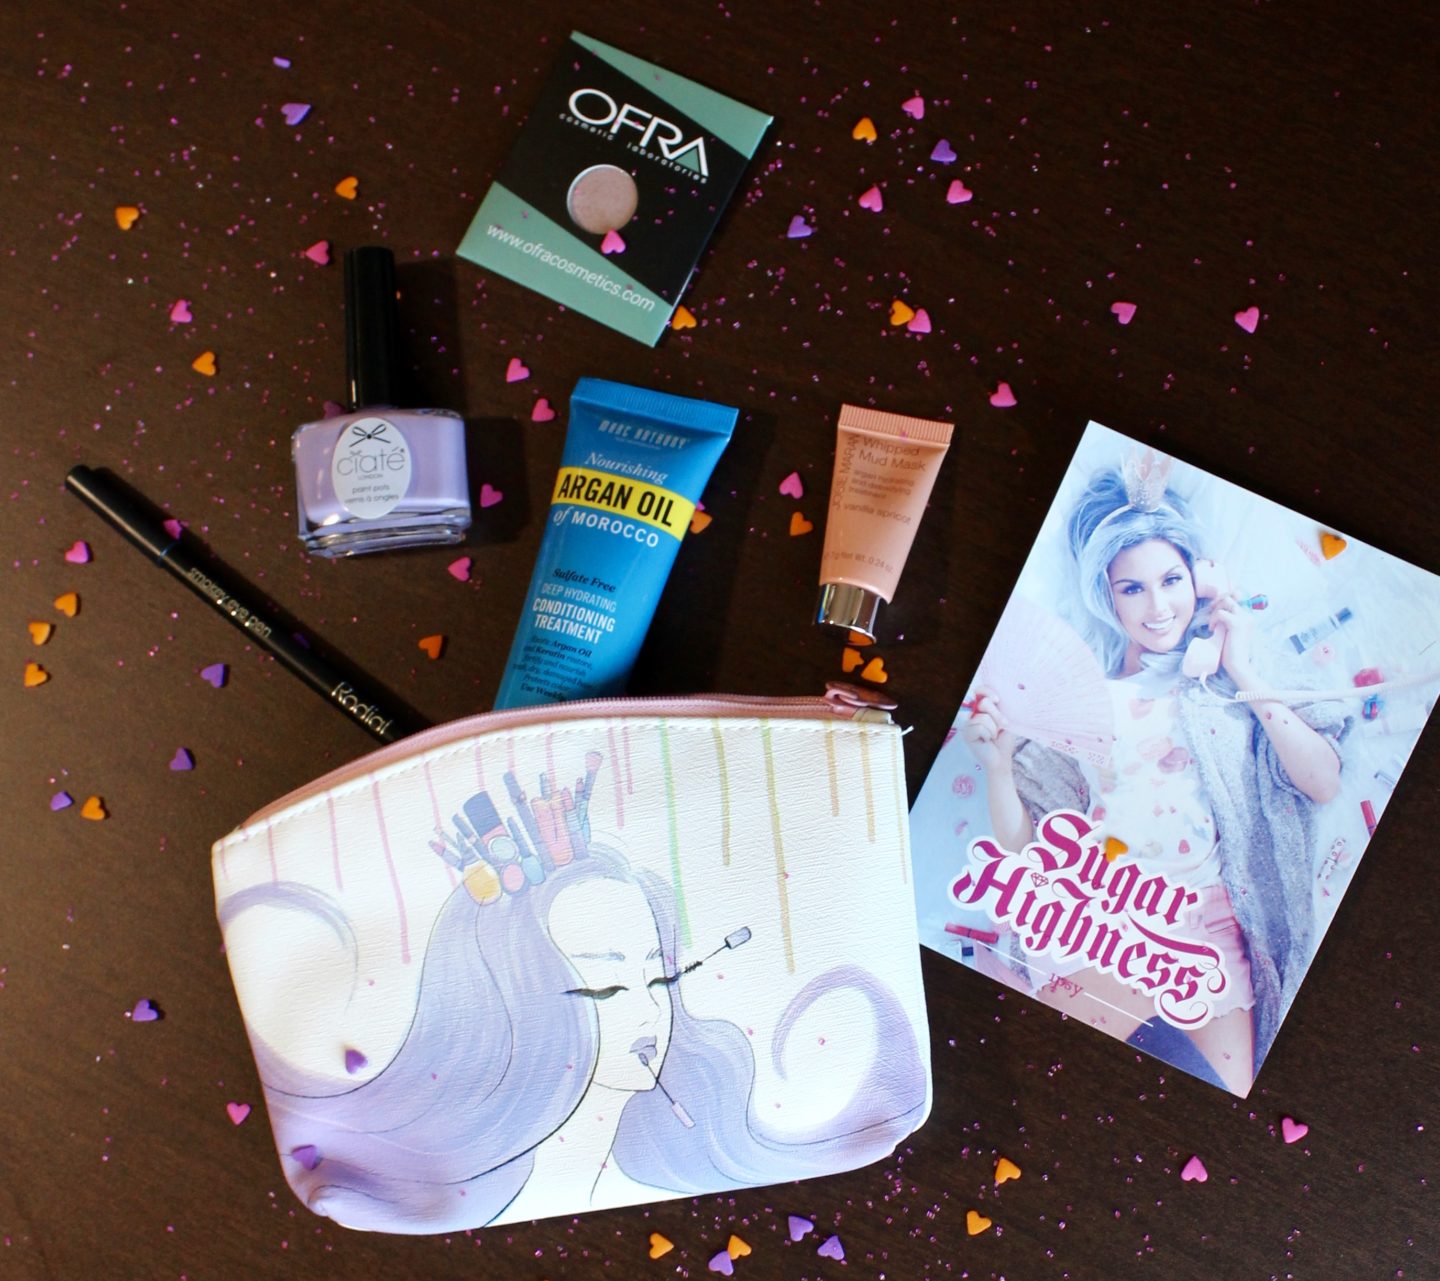 Ipsy Review #14: “Sugar Highness” August Glam Bag